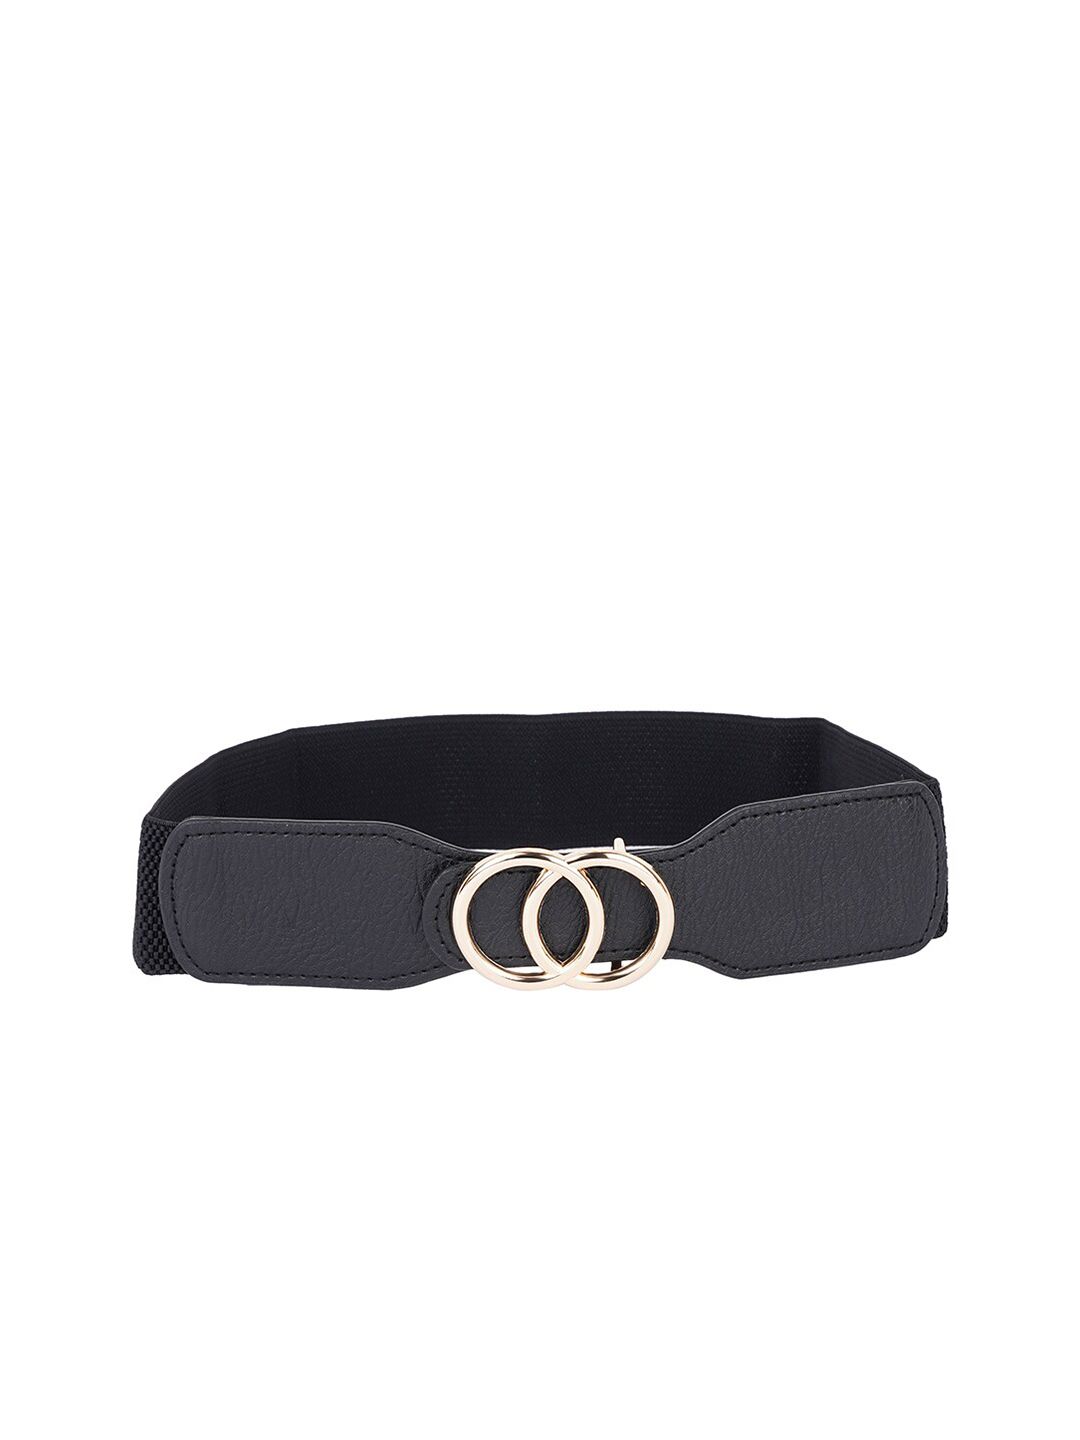 Style SHOES Women Black Textured Belt Price in India